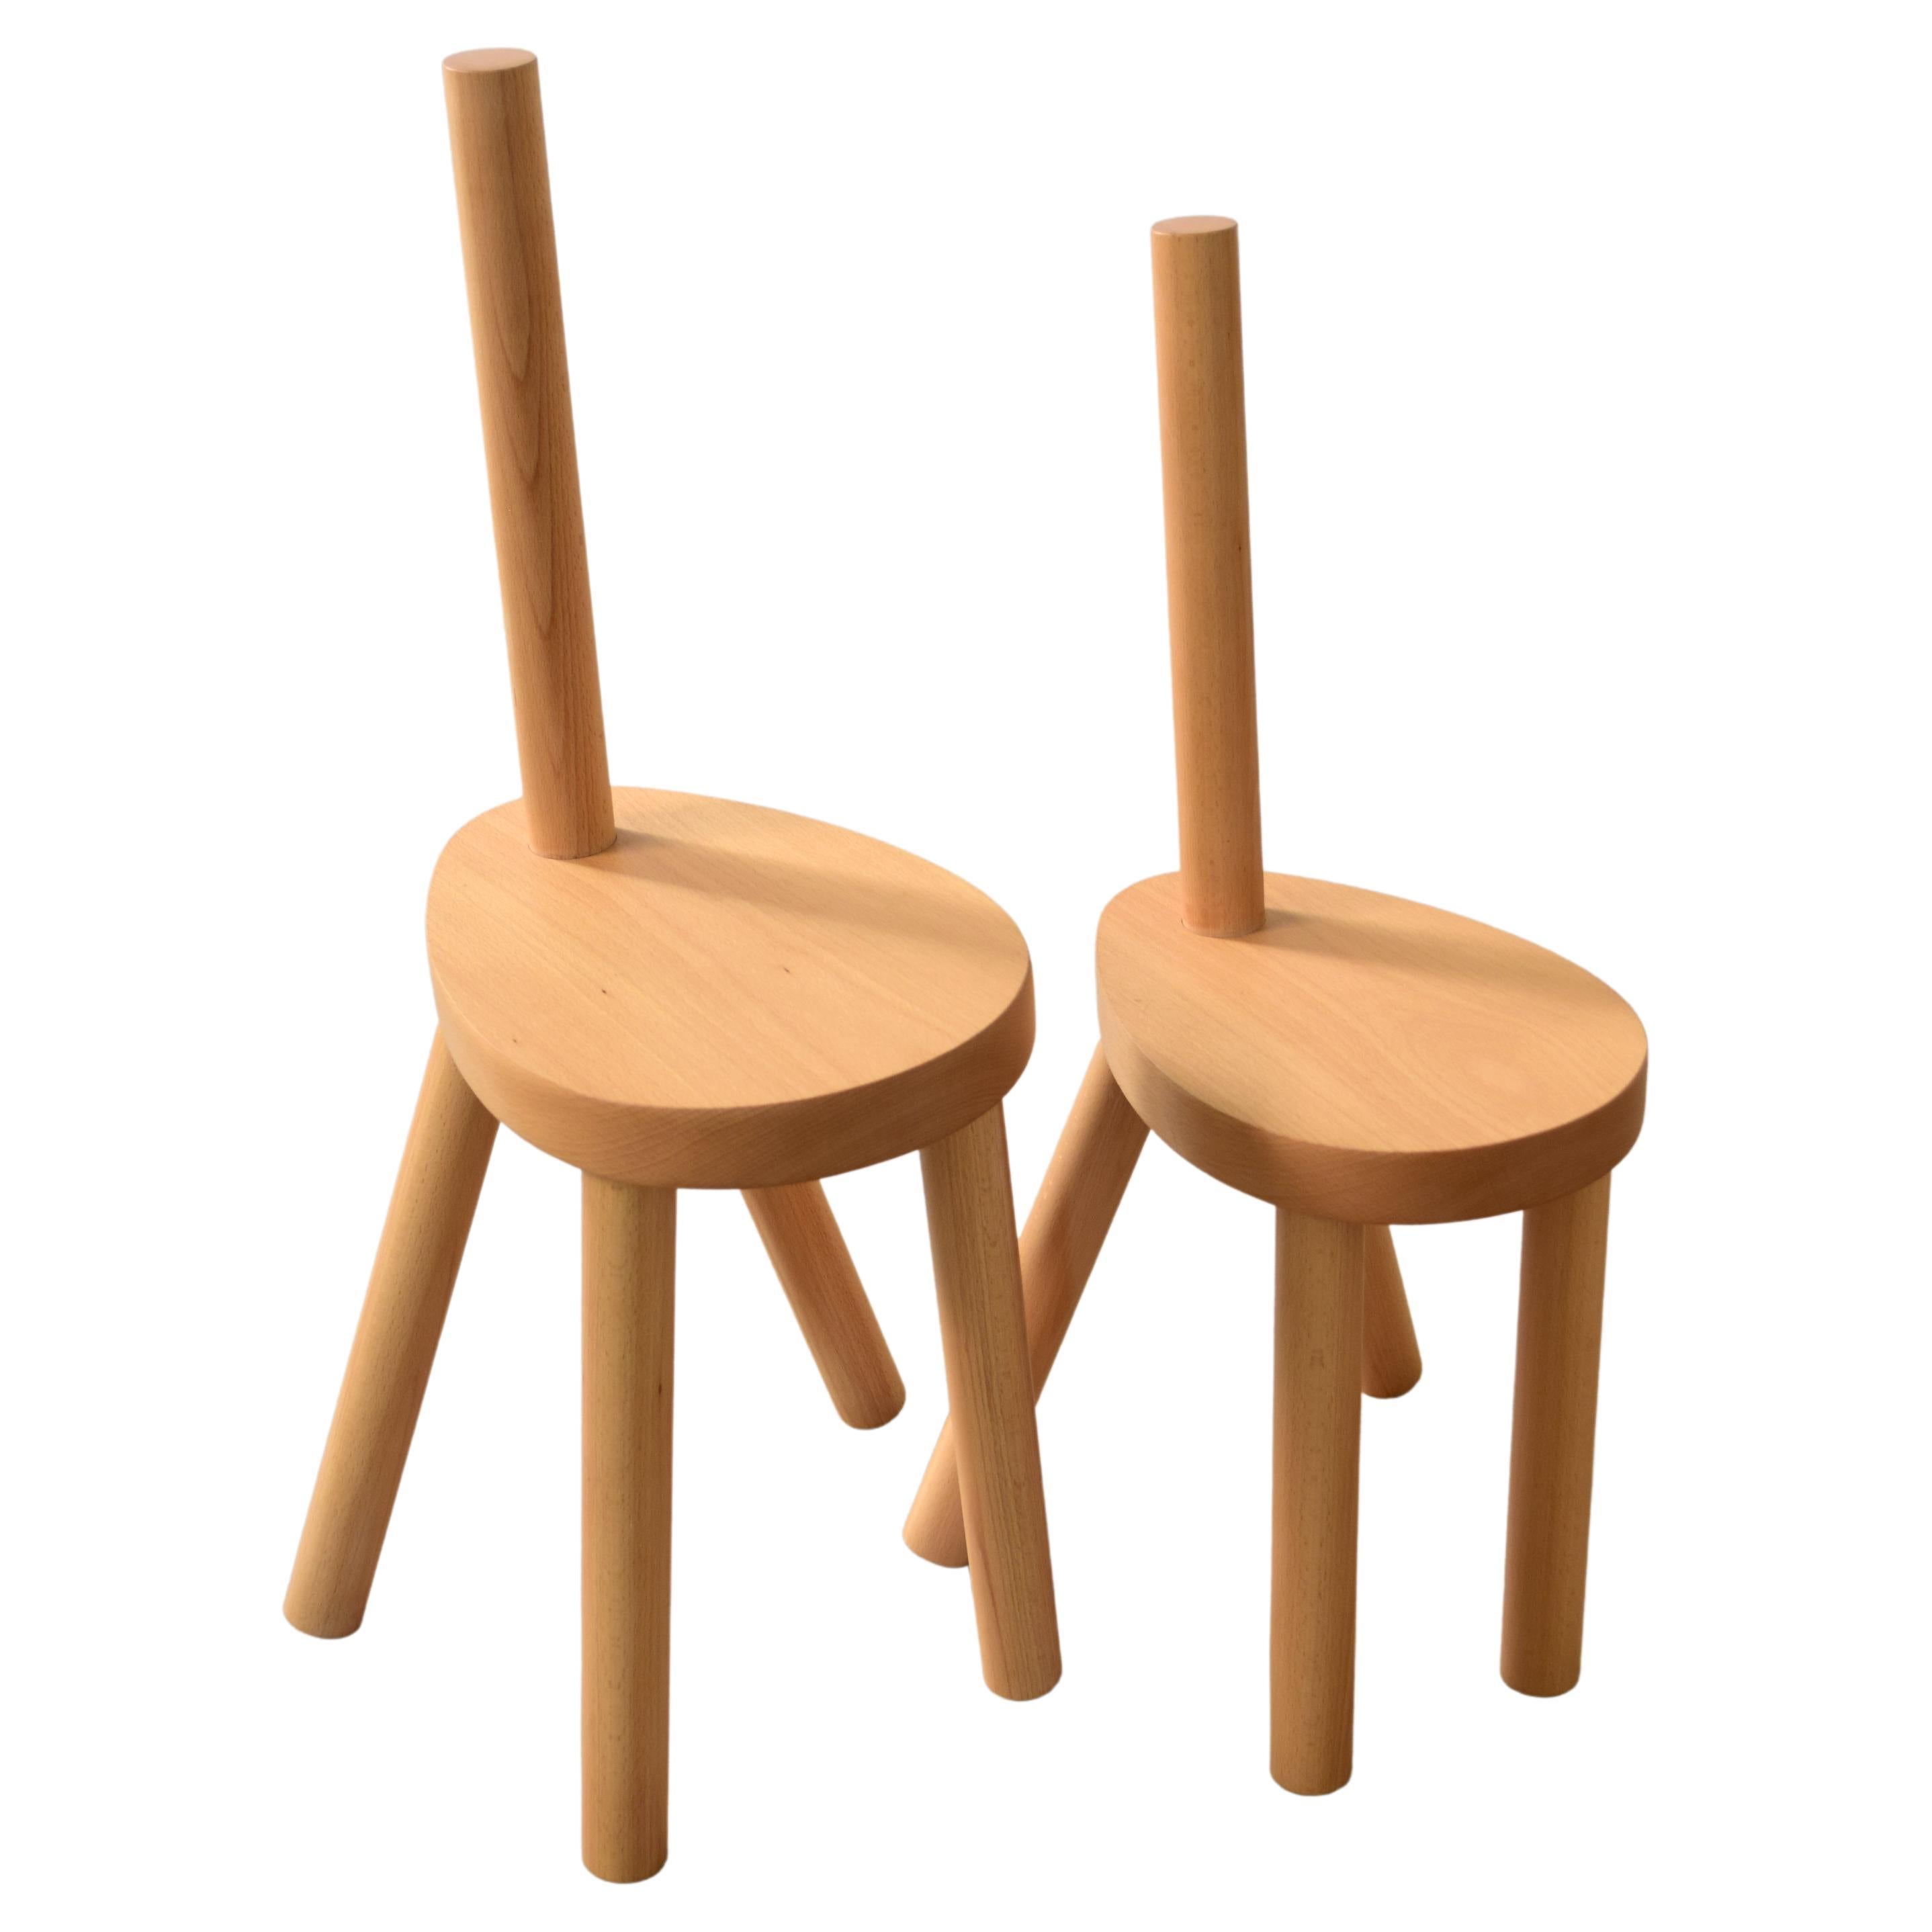 "Y" Chair 41cm Solid Beech Wood and Metal Joints For Sale